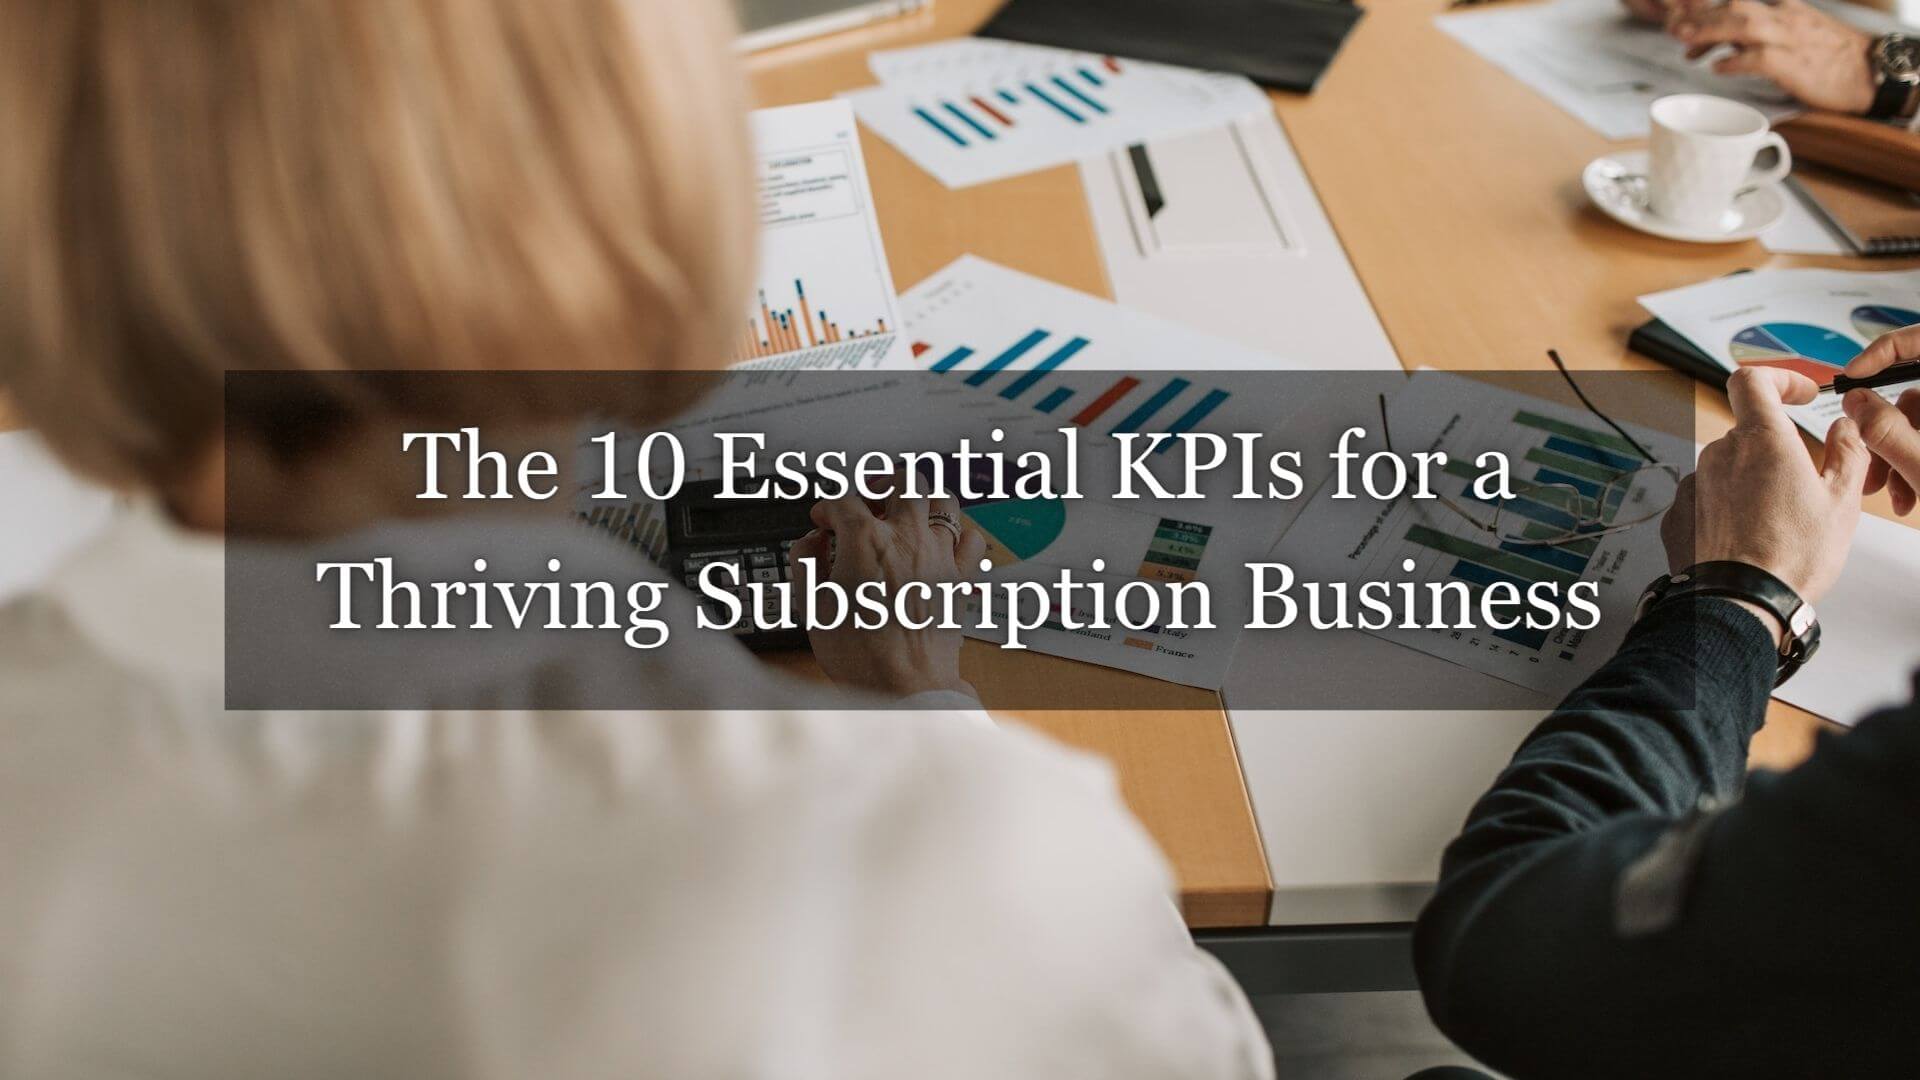 KPIs are metrics that indicate how well a business is performing. Here are the 10 vital KPIs to ensure your subscription business survives.